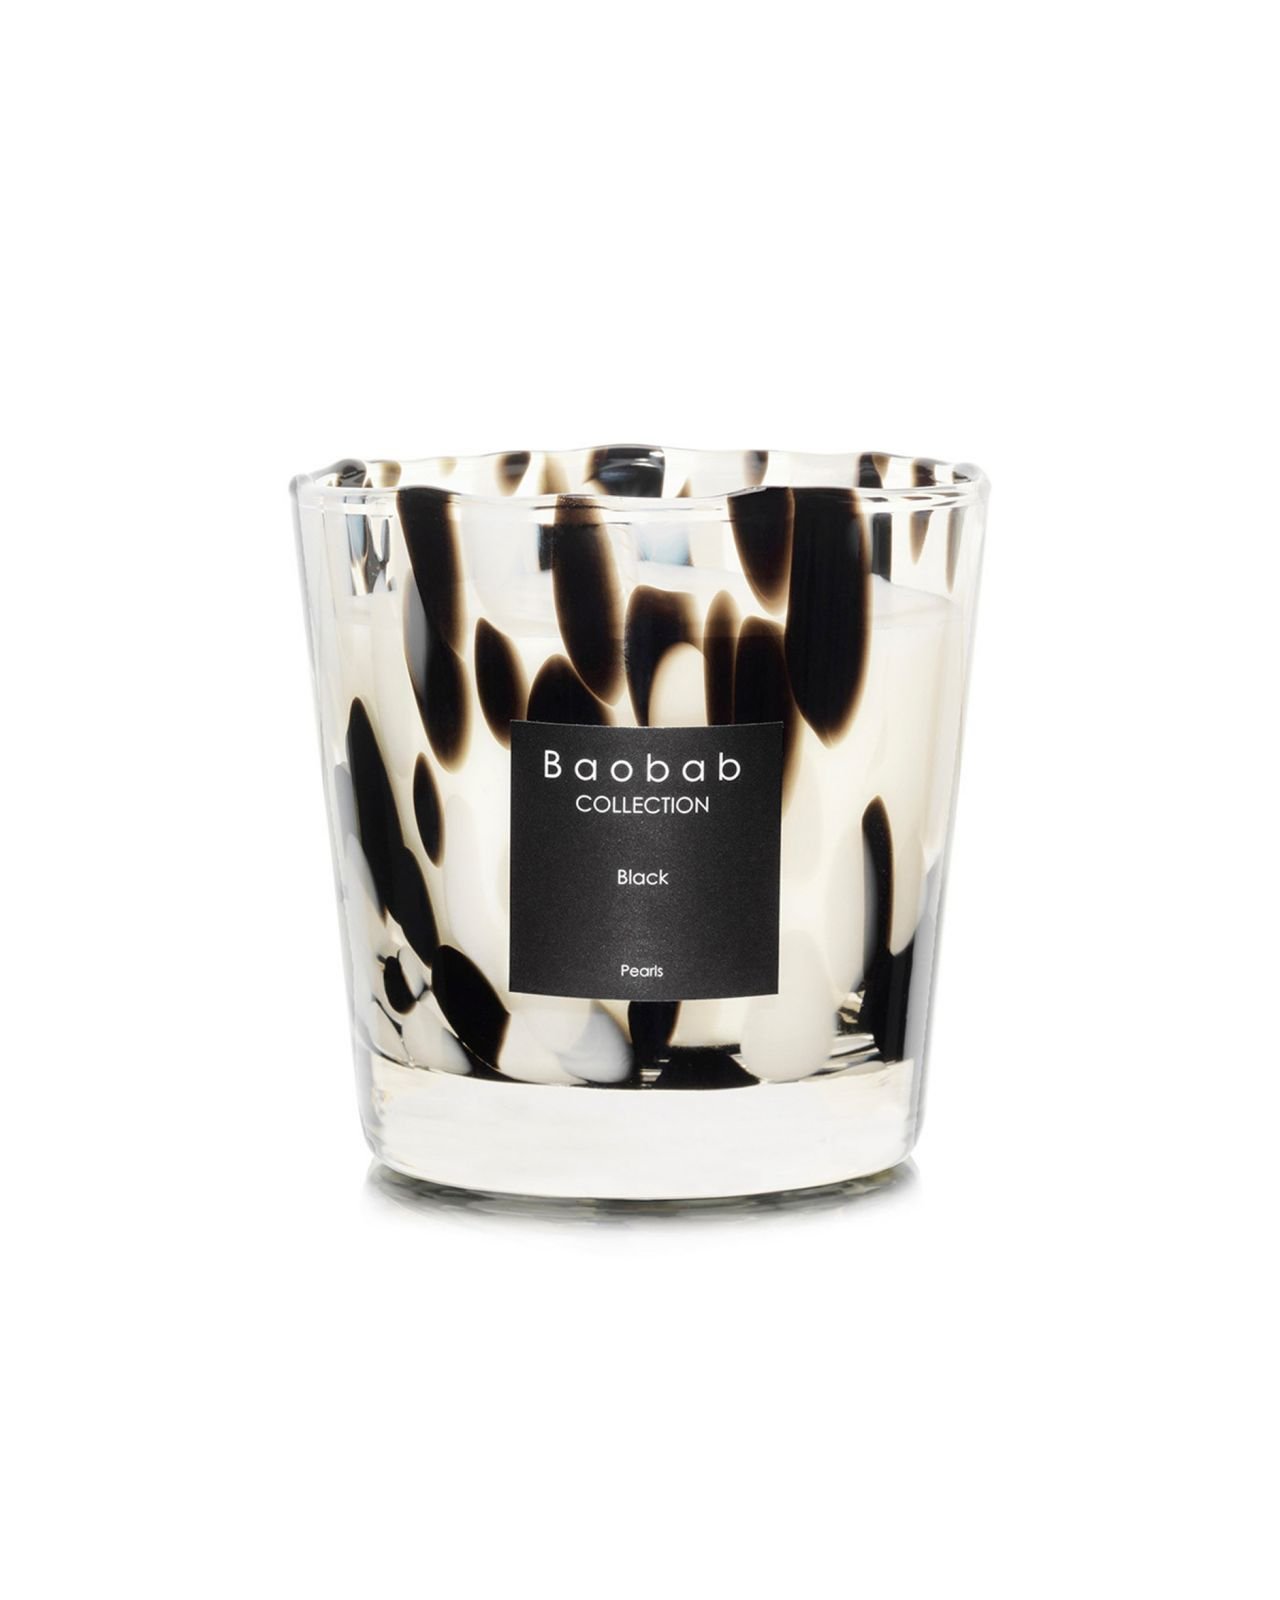 Black Pearls scented candle - Newport